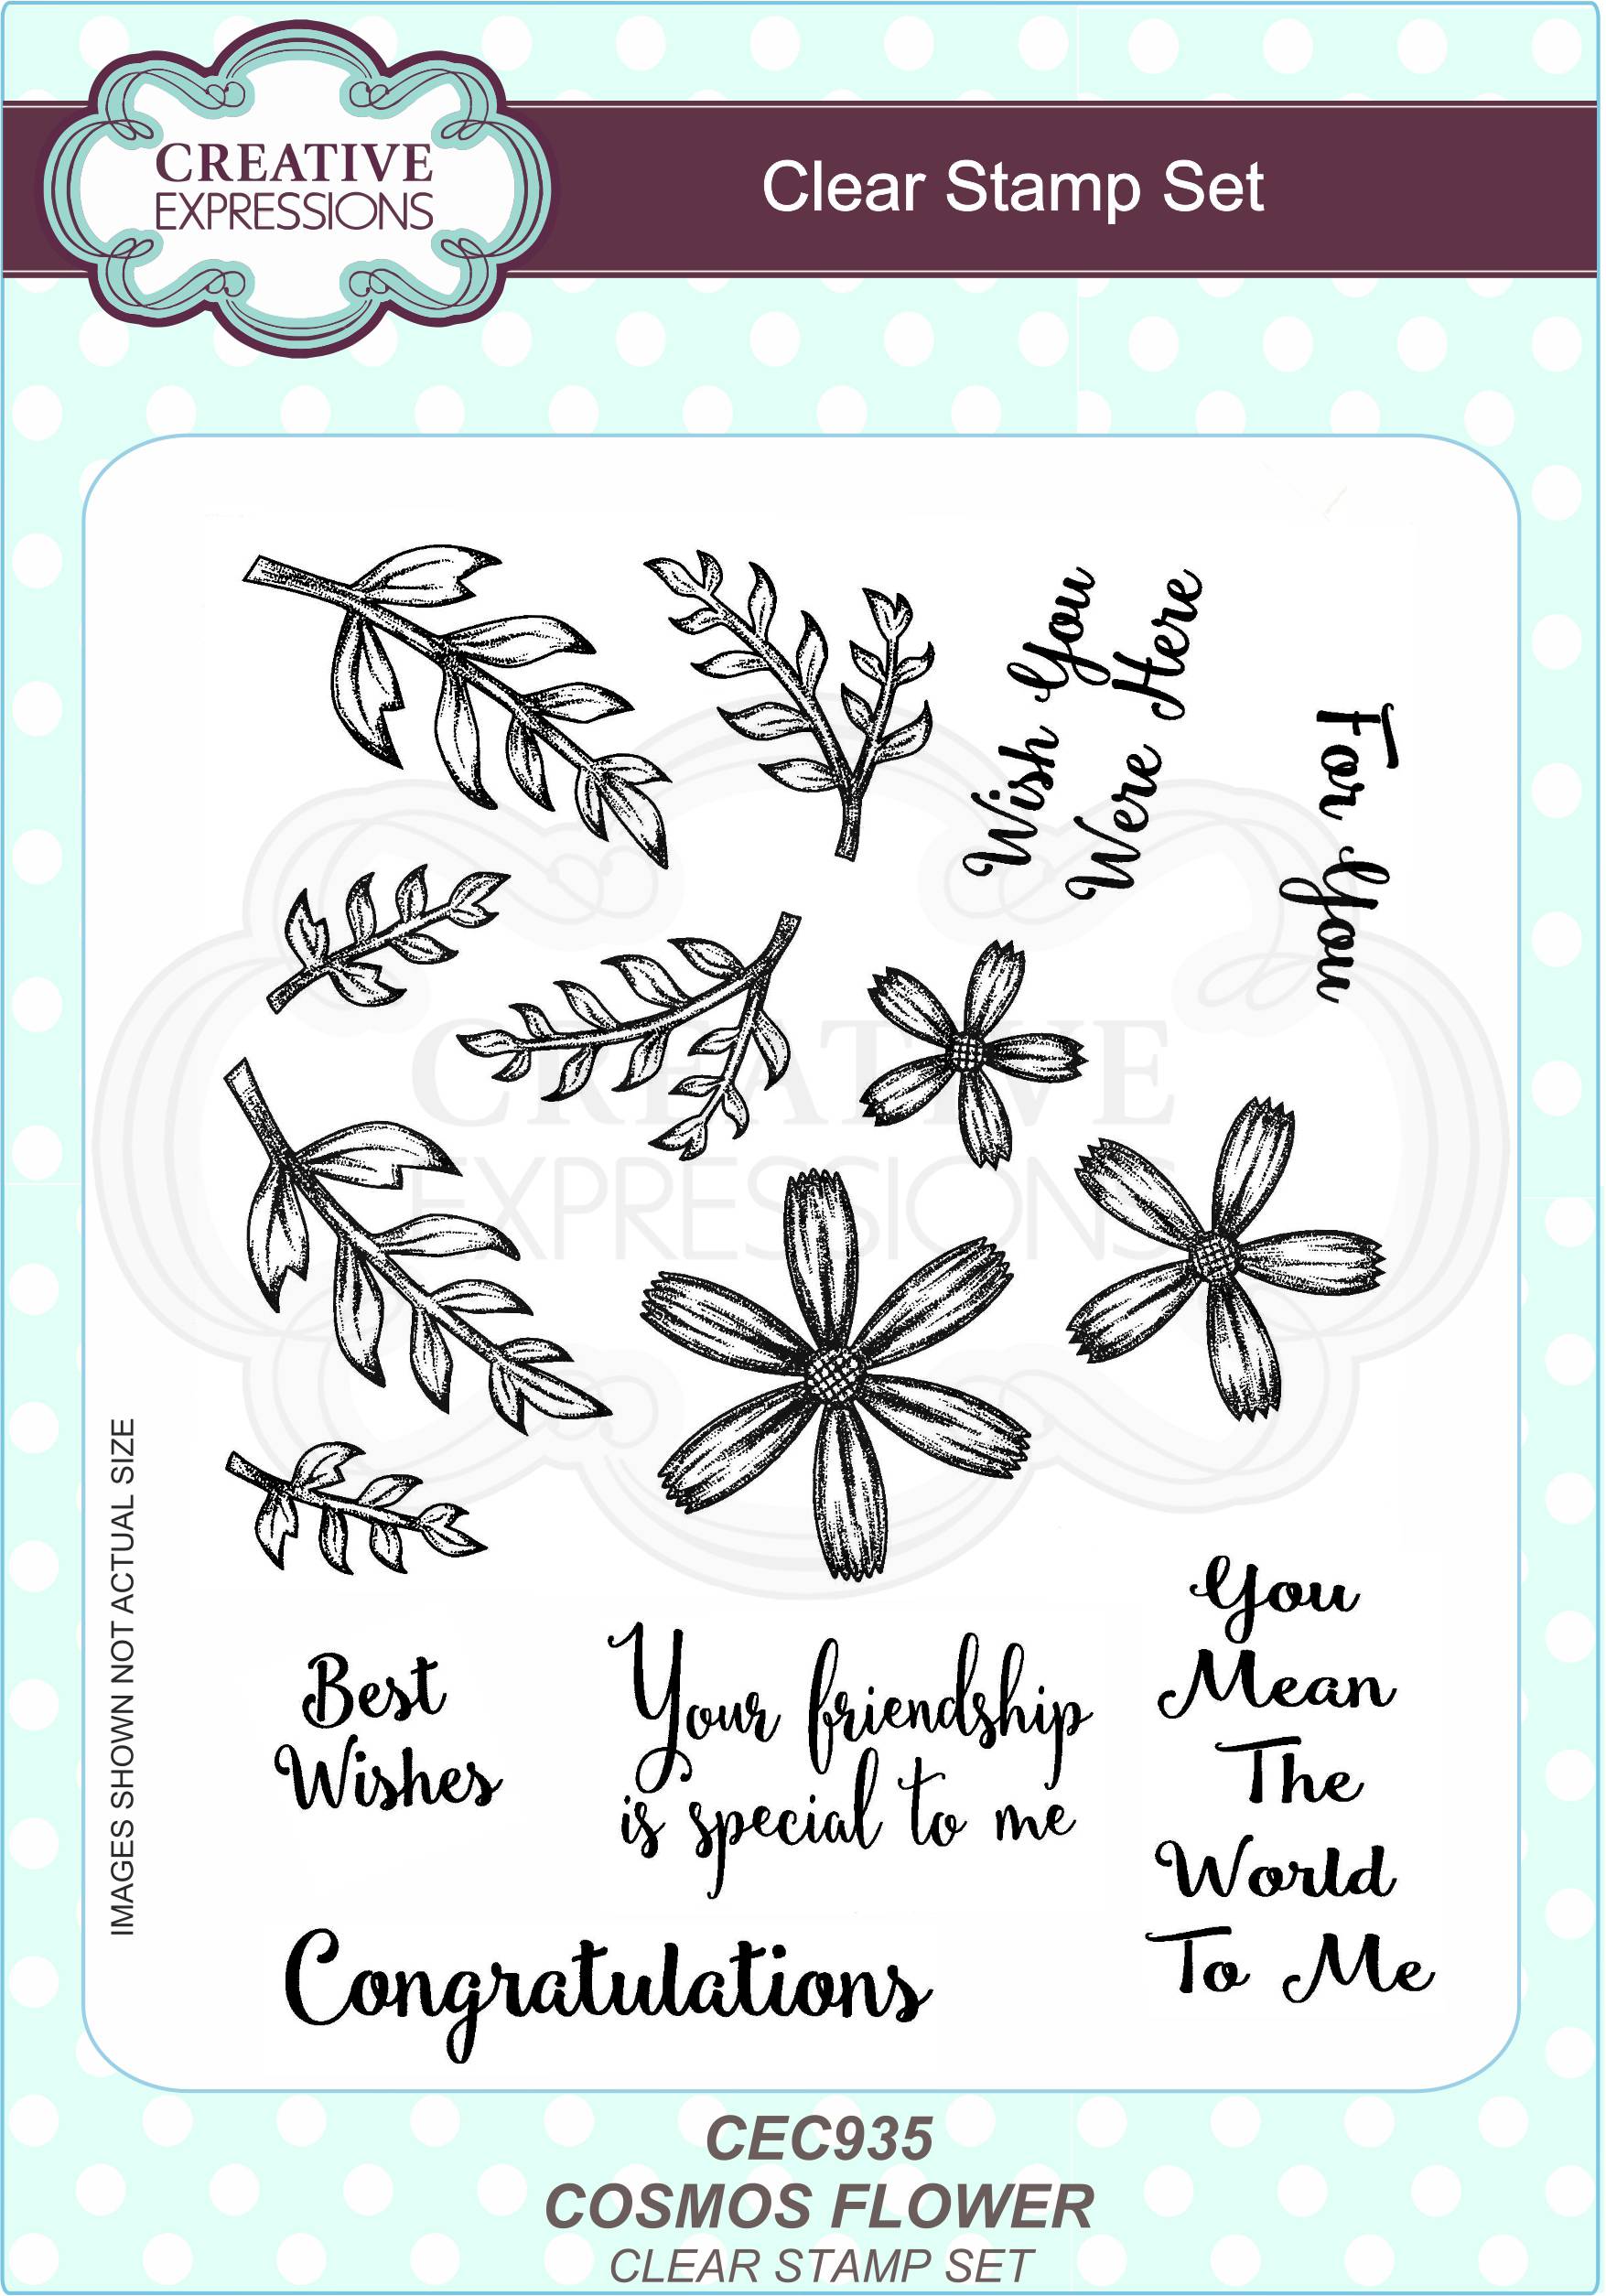 Creative Expressions Cosmos Flower Clear Stamp Set.